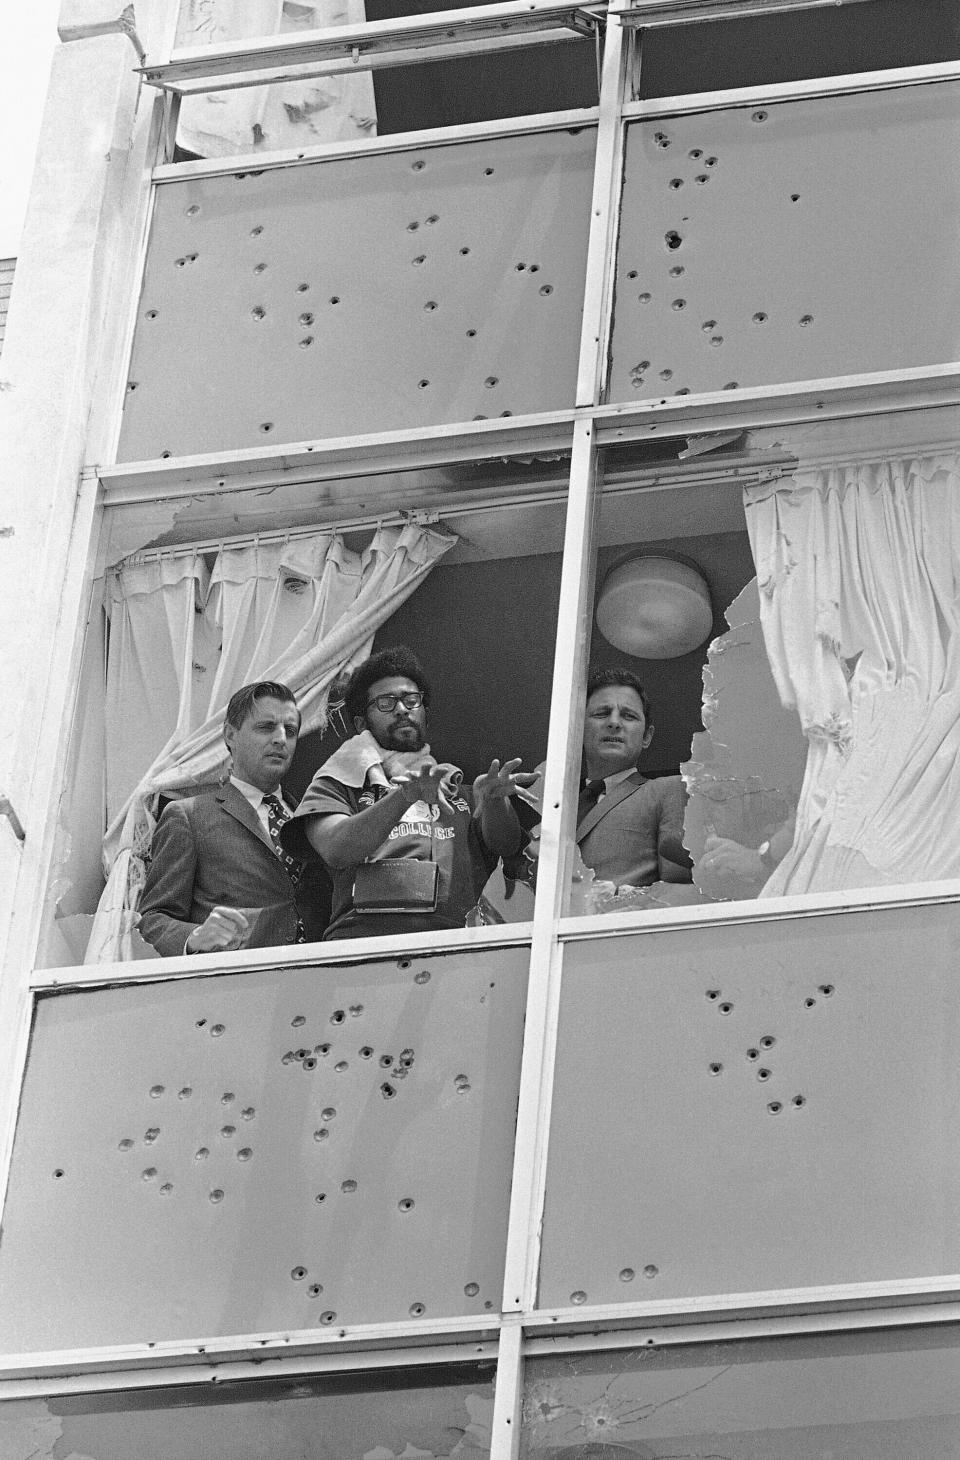 FILE - In this May 20, 1970, file photo, U.S. Sens. Walter Mondale, D-Minn., left, and Birch Bayh, D-Ind., right, look from the shattered windows of Alexander Hall, a women's dormitory, during a visit to Jackson State College, in Jackson, Miss., days after an assault by local white police and members of the Mississippi Highway Patrol, who claimed they had seen a sniper. Pointing out the view is student Carl Griffin. The historically Black school canceled its 1970 commencement after the violent incident. Fifty-one years later, the school now called Jackson State University is honoring its Class of 1970, as members are being invited back to salute their academic achievements with a graduation ceremony on Saturday, May 15, 2021. (AP Photo, File)